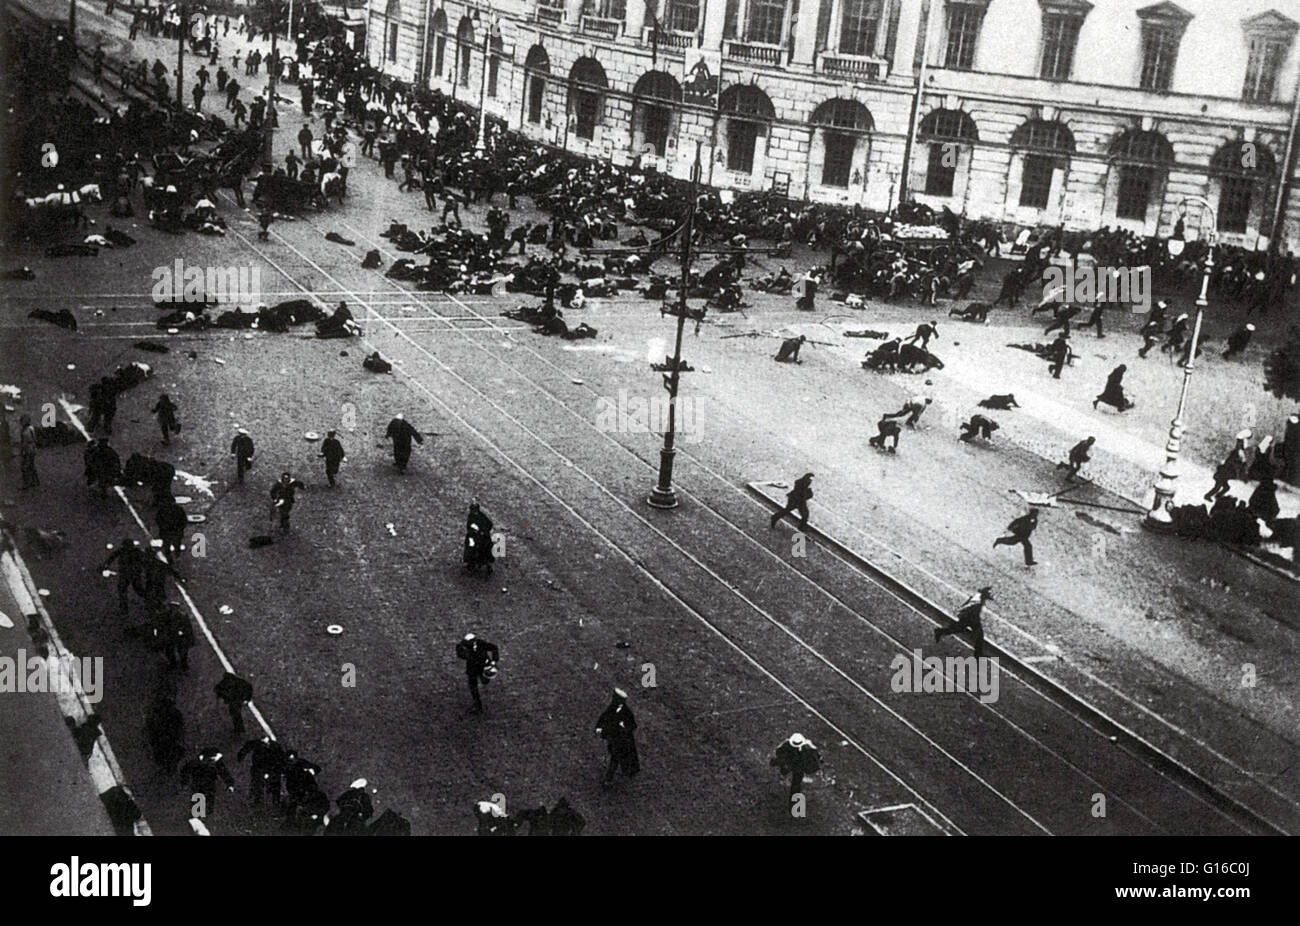 Petrograd (Saint Petersburg), July 17, 1917. Street demonstration on Nevsky Prospekt just after troops of the Provisional Government have opened fire with machine guns. The July Days refers to events in 1917 that took place in Petrograd, Russia, between J Stock Photo